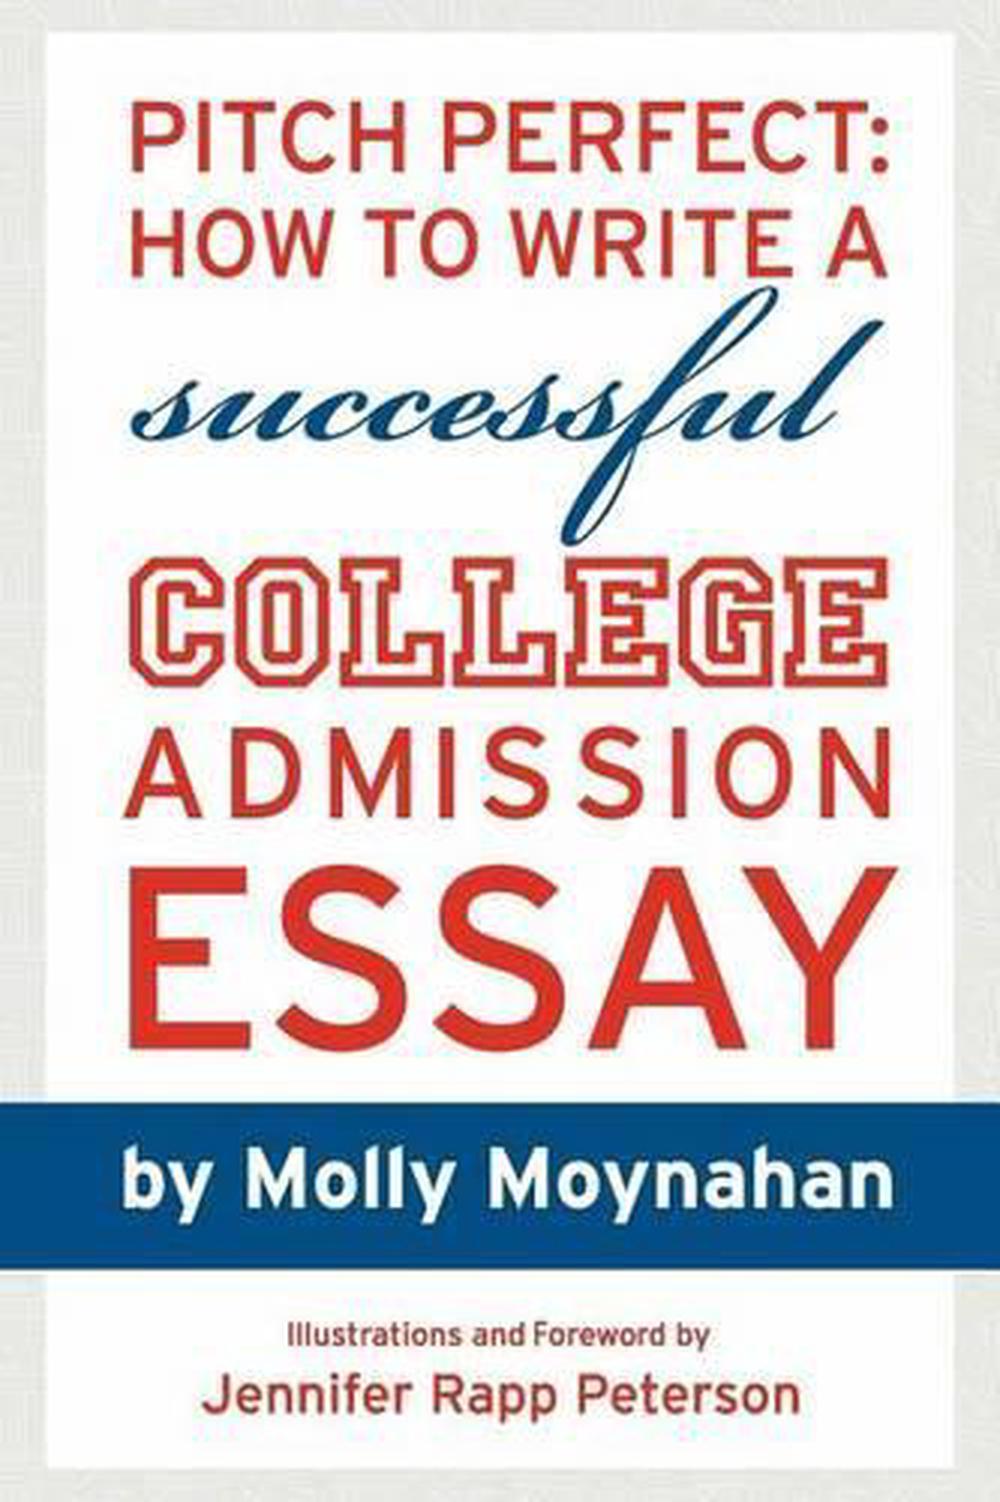 Pitch Perfect: How to Write a Successful College Admission Essay by Molly Moynahan